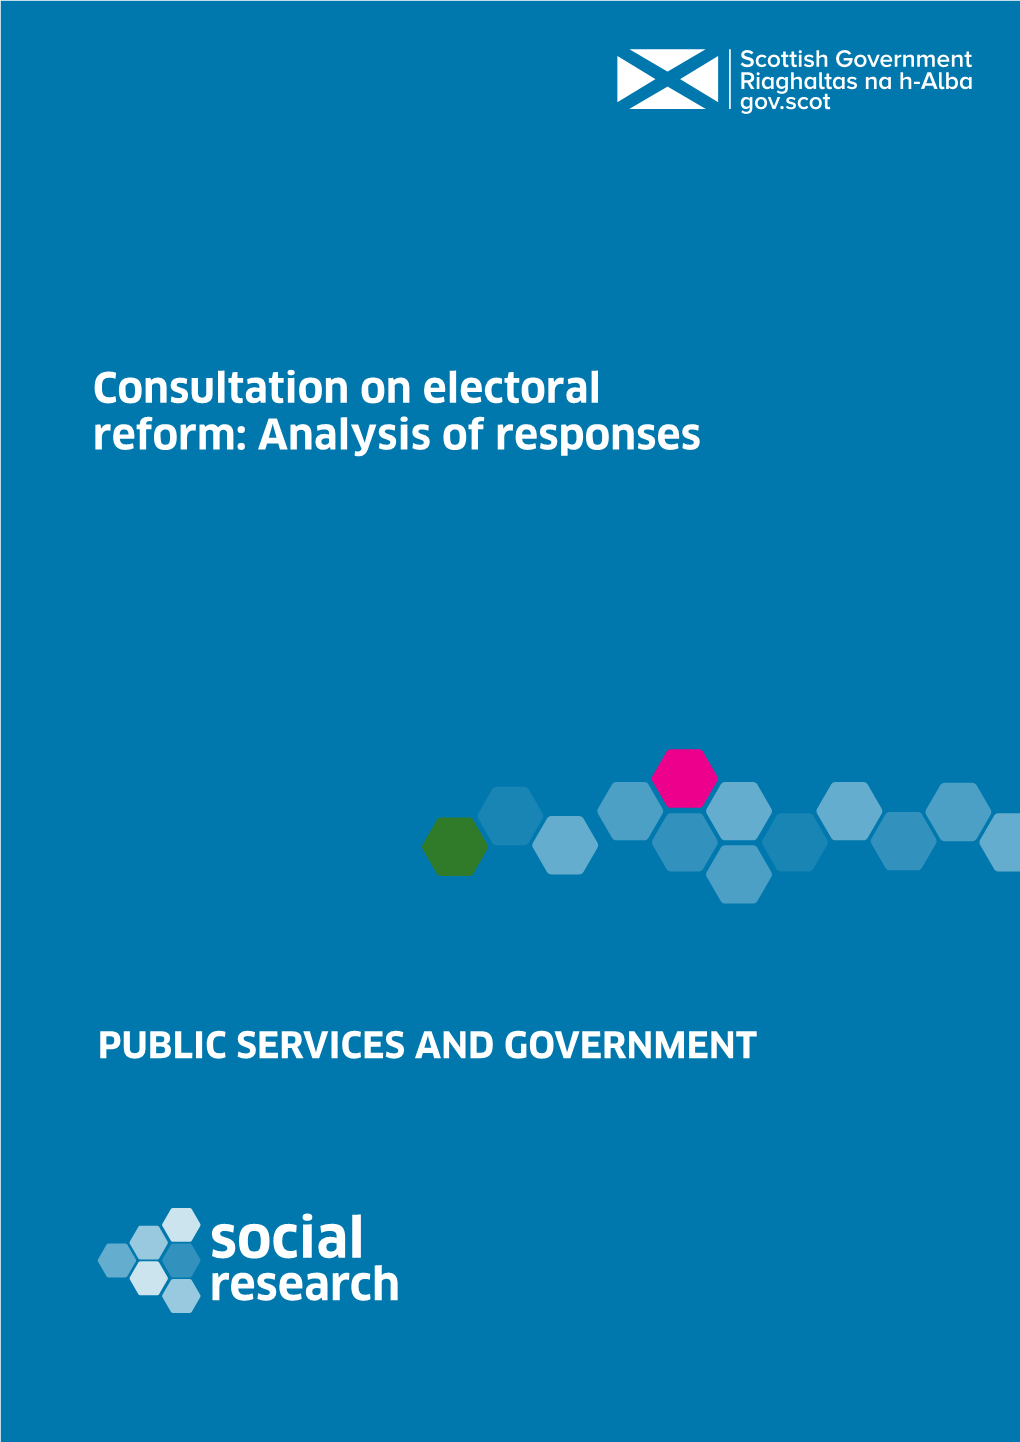 Consultation on Electoral Reform: Analysis of Responses